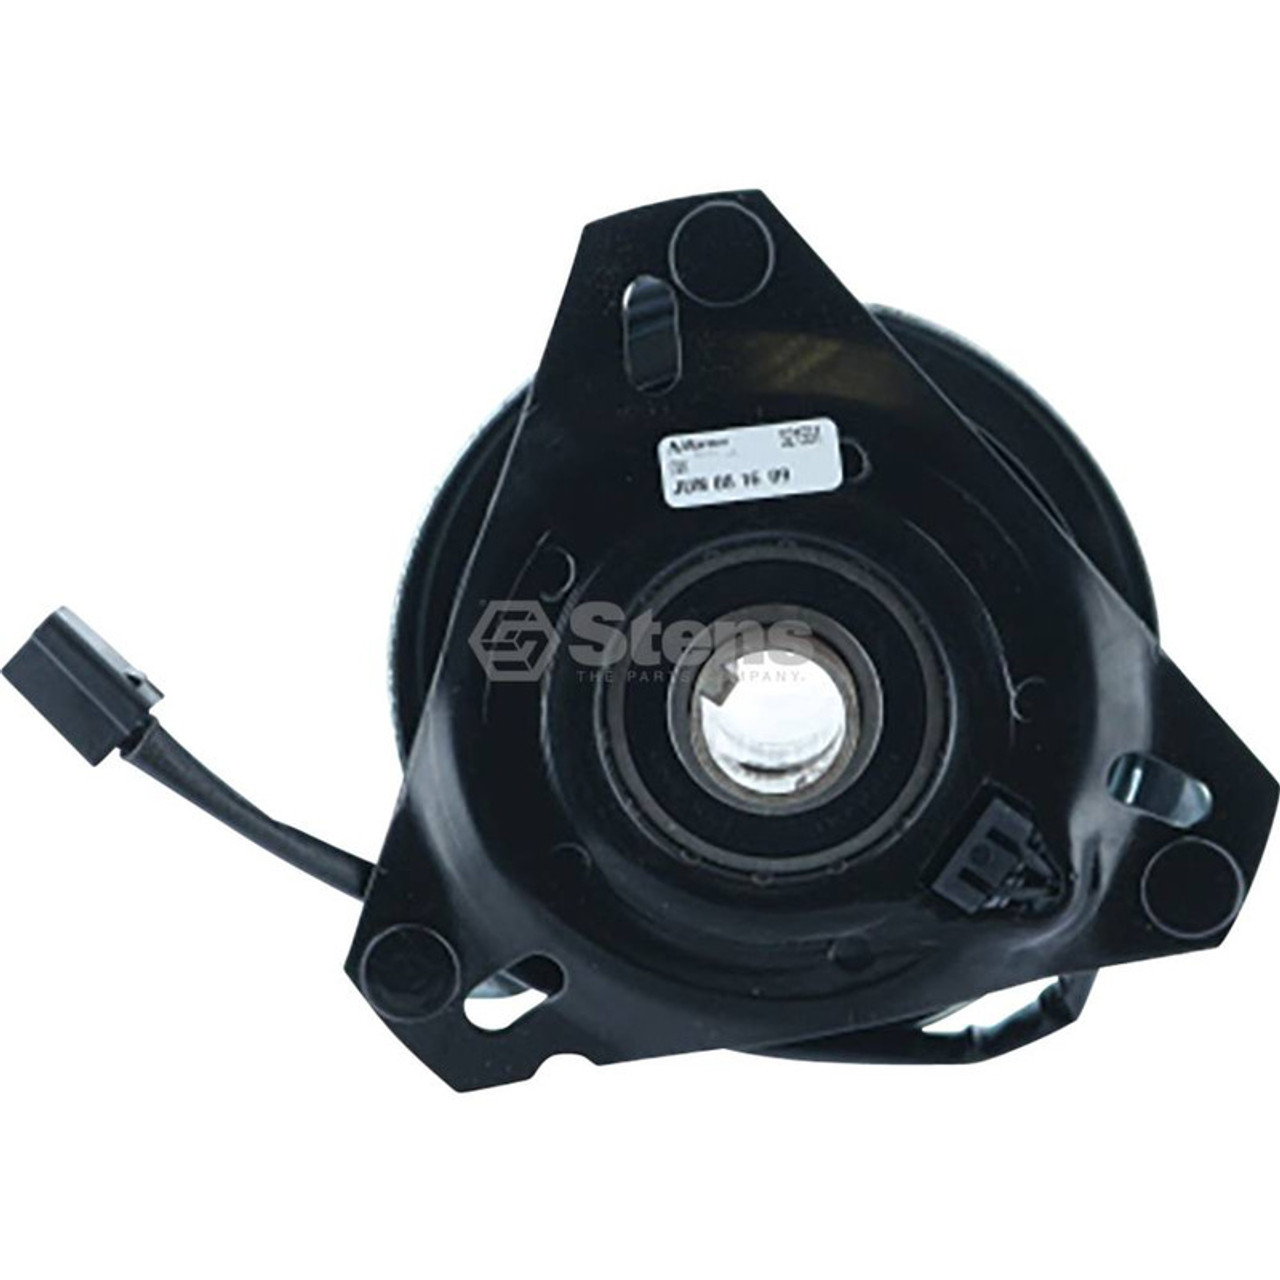 Electric PTO Clutch for MTD 717-0949, 717-0949P, 717-1434, 917-0949, 917-1434